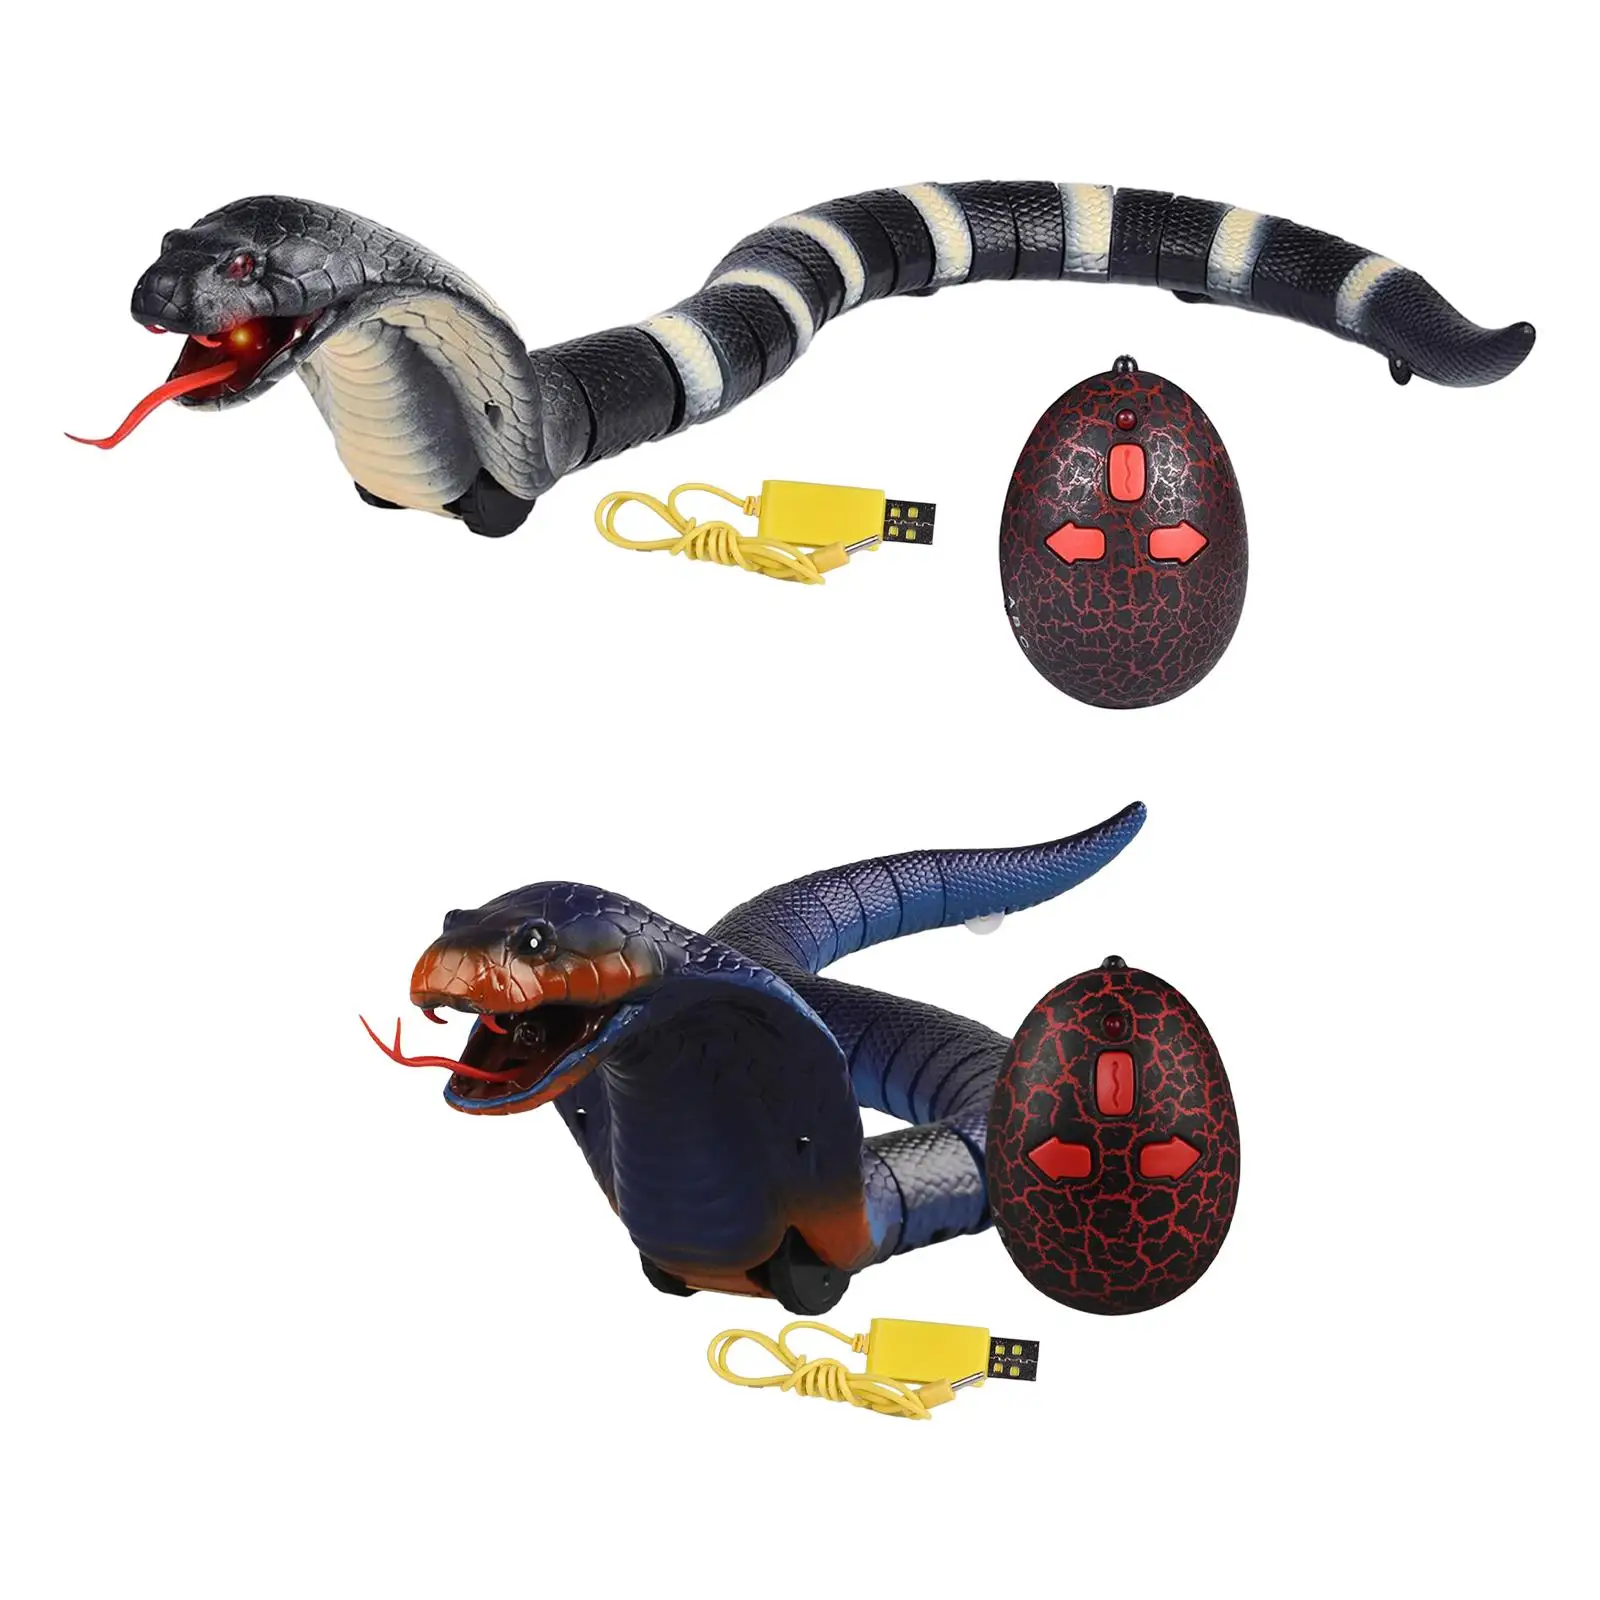 

Remote Control Snake Infrared for Kids Adults Joke Fast Moving Snake Scary Trick Toy for Birthday Gifts Christmas Halloween